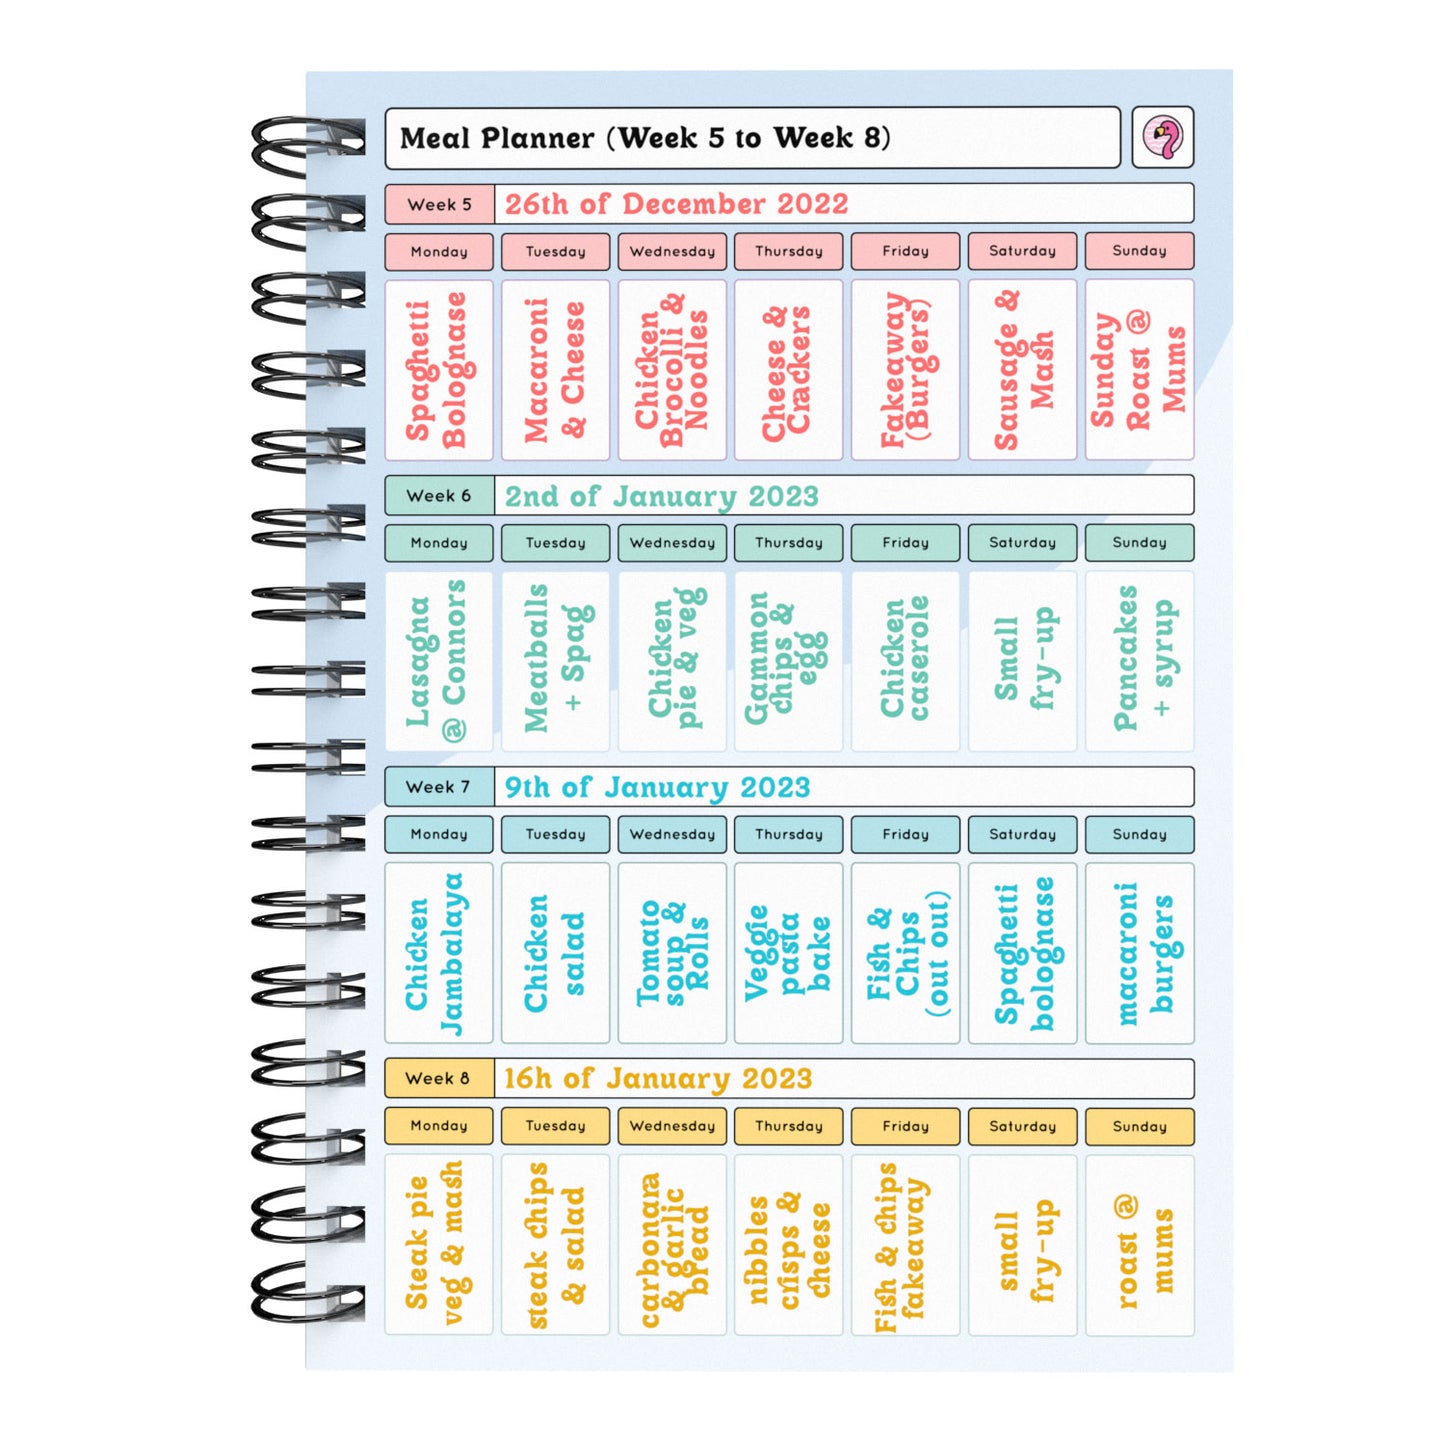 Food Diary - C2 - Calorie Counting